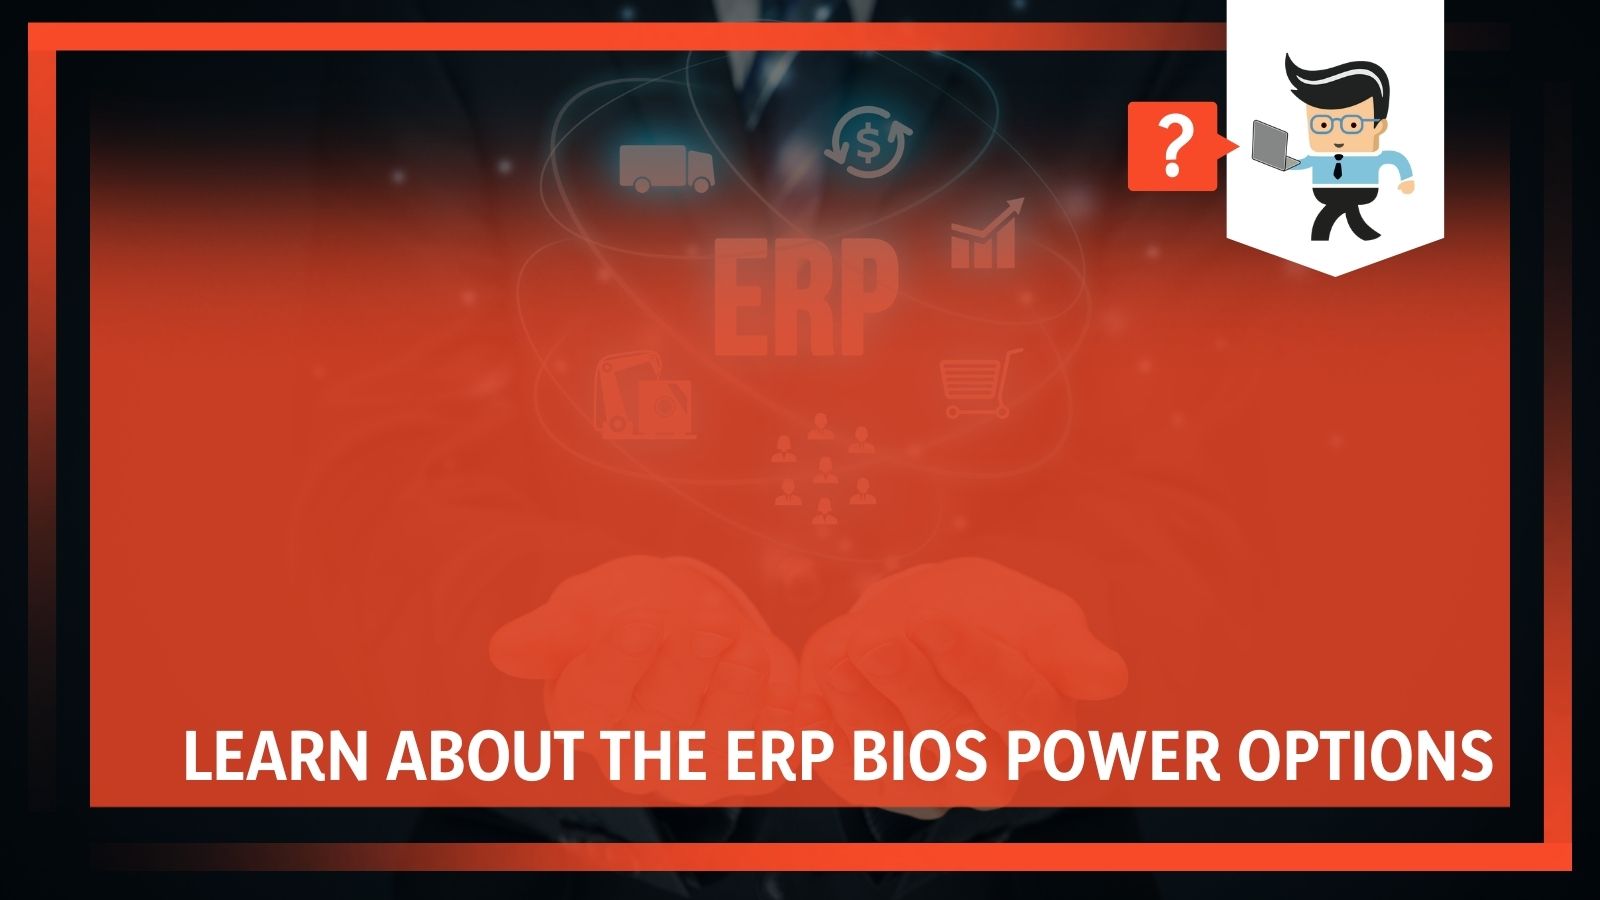 ErP ready? Learn About the ErP BIOS Power Options Here